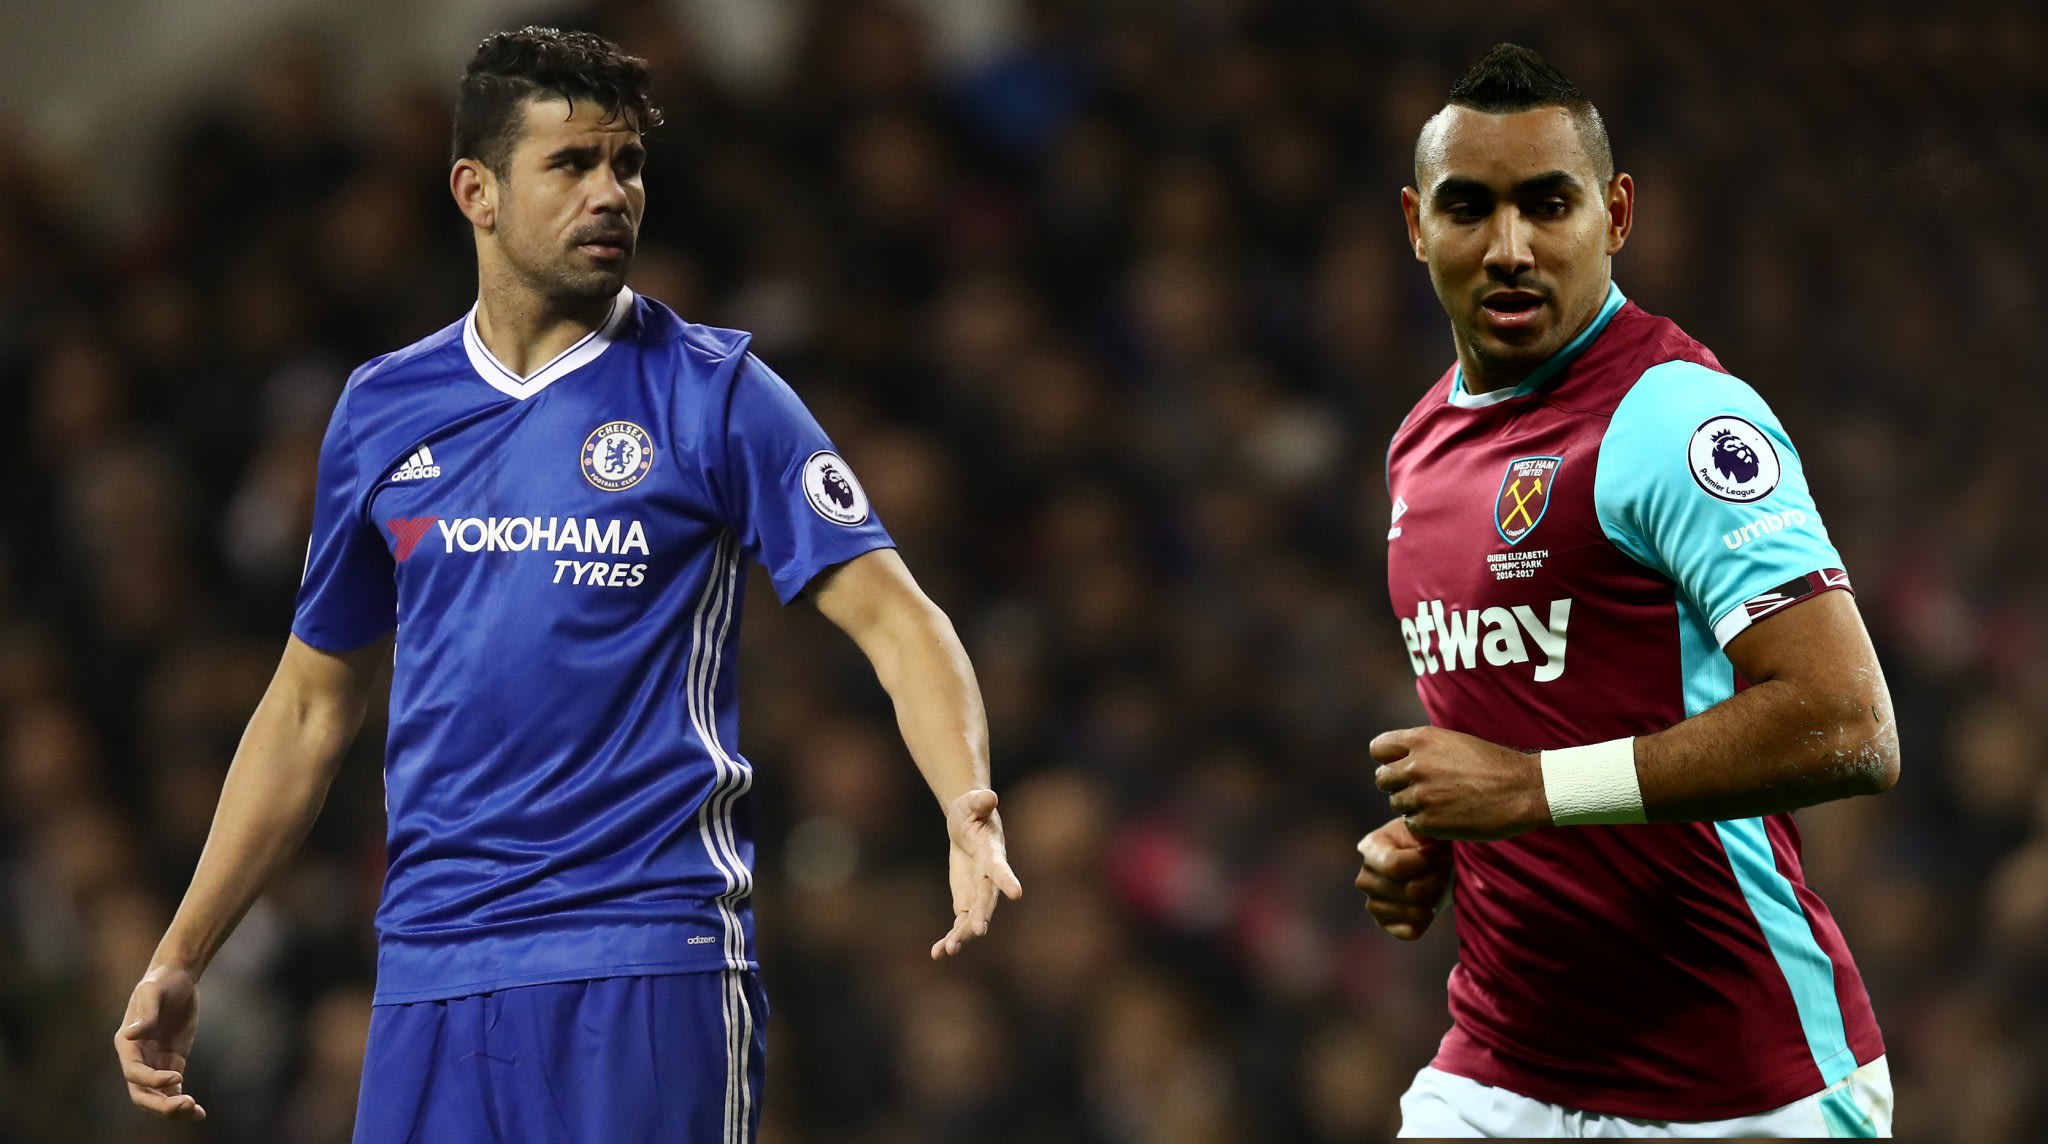 Hot Transfer Window Gossip: Costa 'rejects improved Chelsea contract', Marseille and West Ham 'have Payet talks'